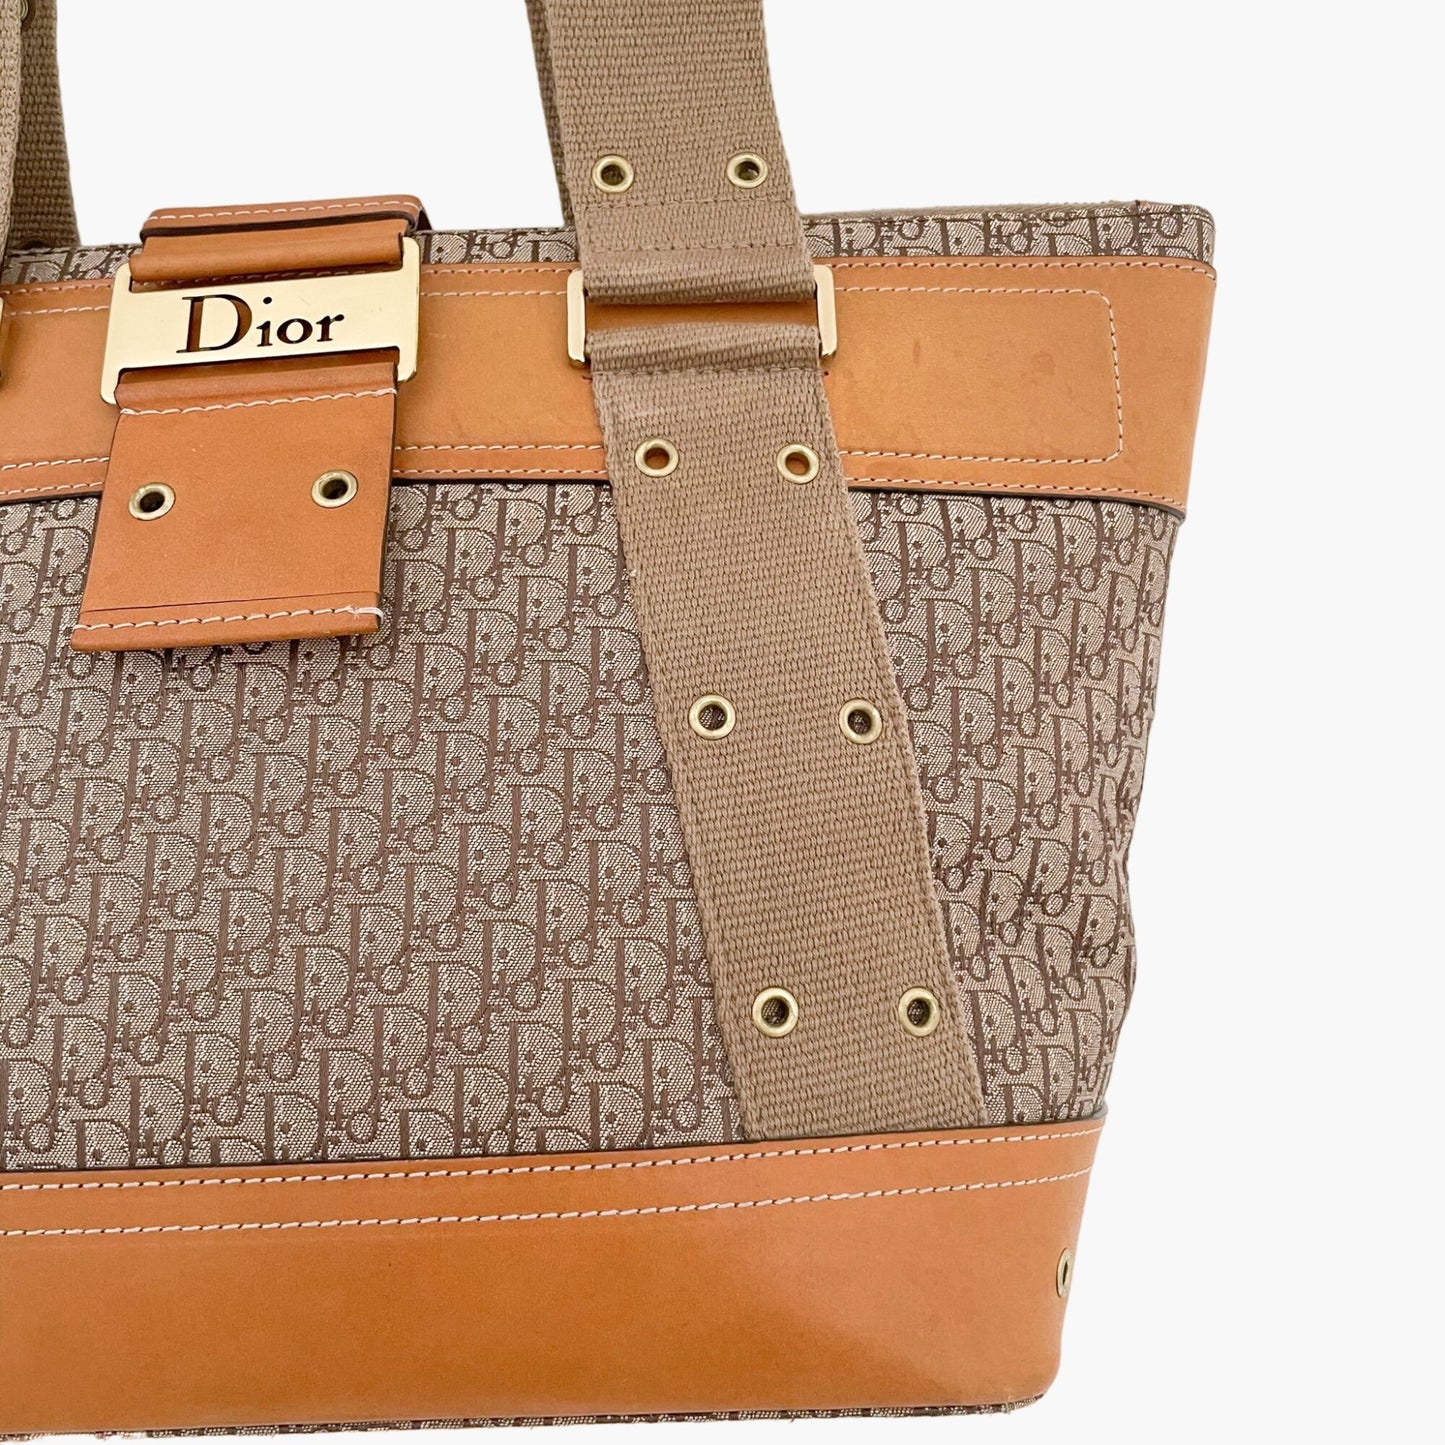 Christian Dior Street Chic Tote in Tan